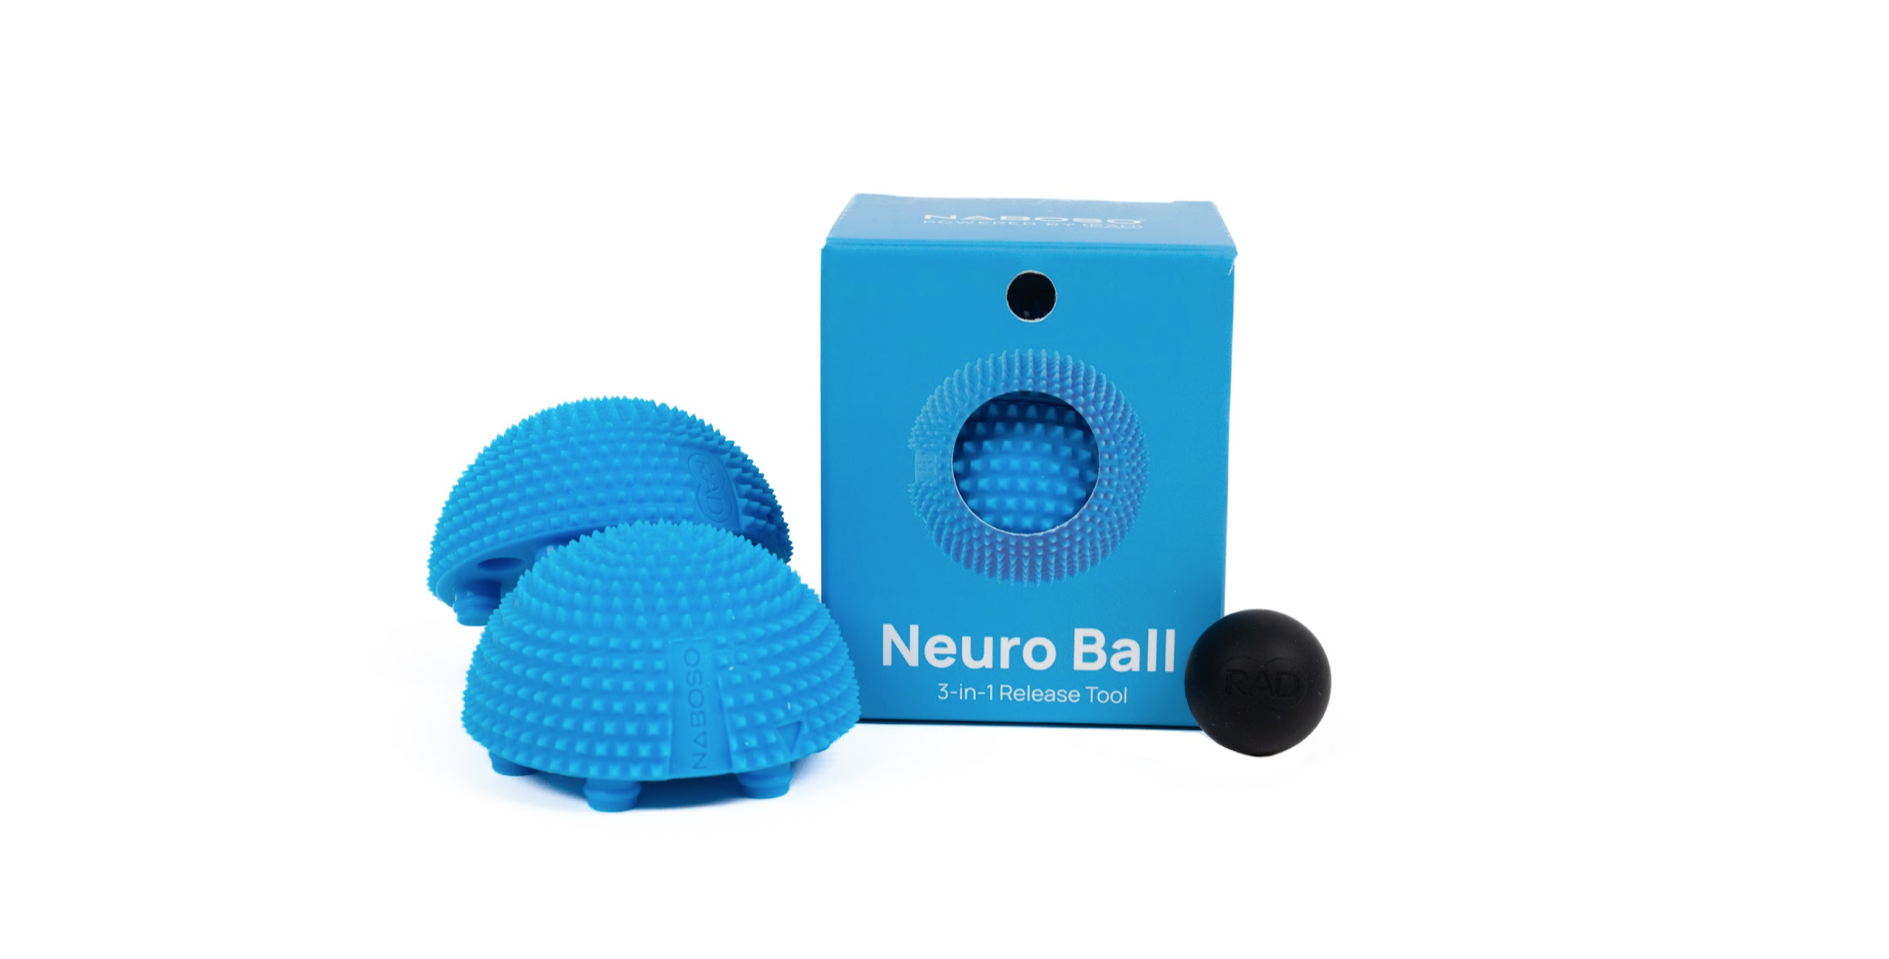 New Packaging, Same Top Selling Neuro Ball